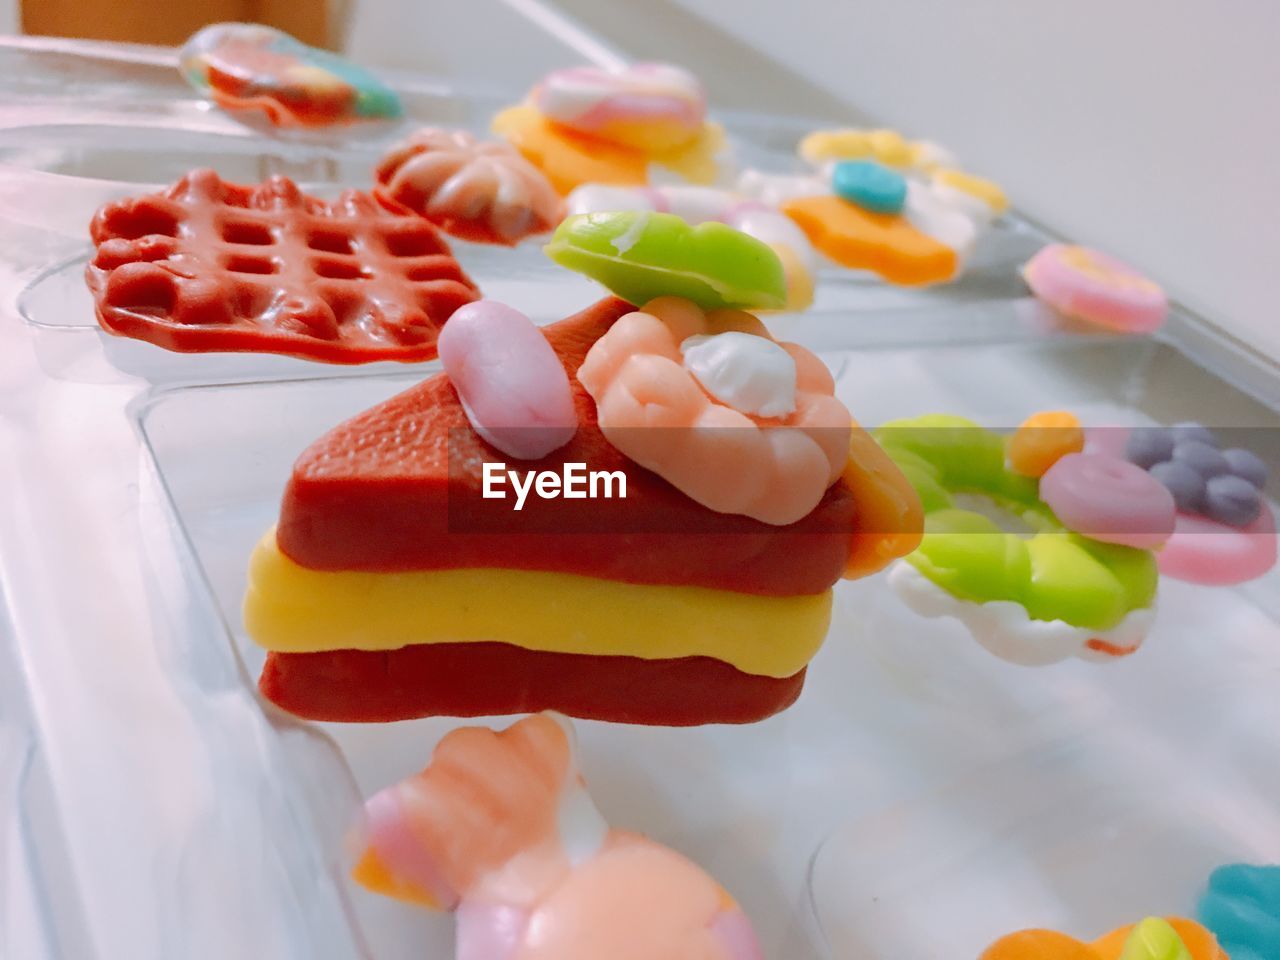 CLOSE-UP OF MULTI COLORED CANDIES IN PLATE